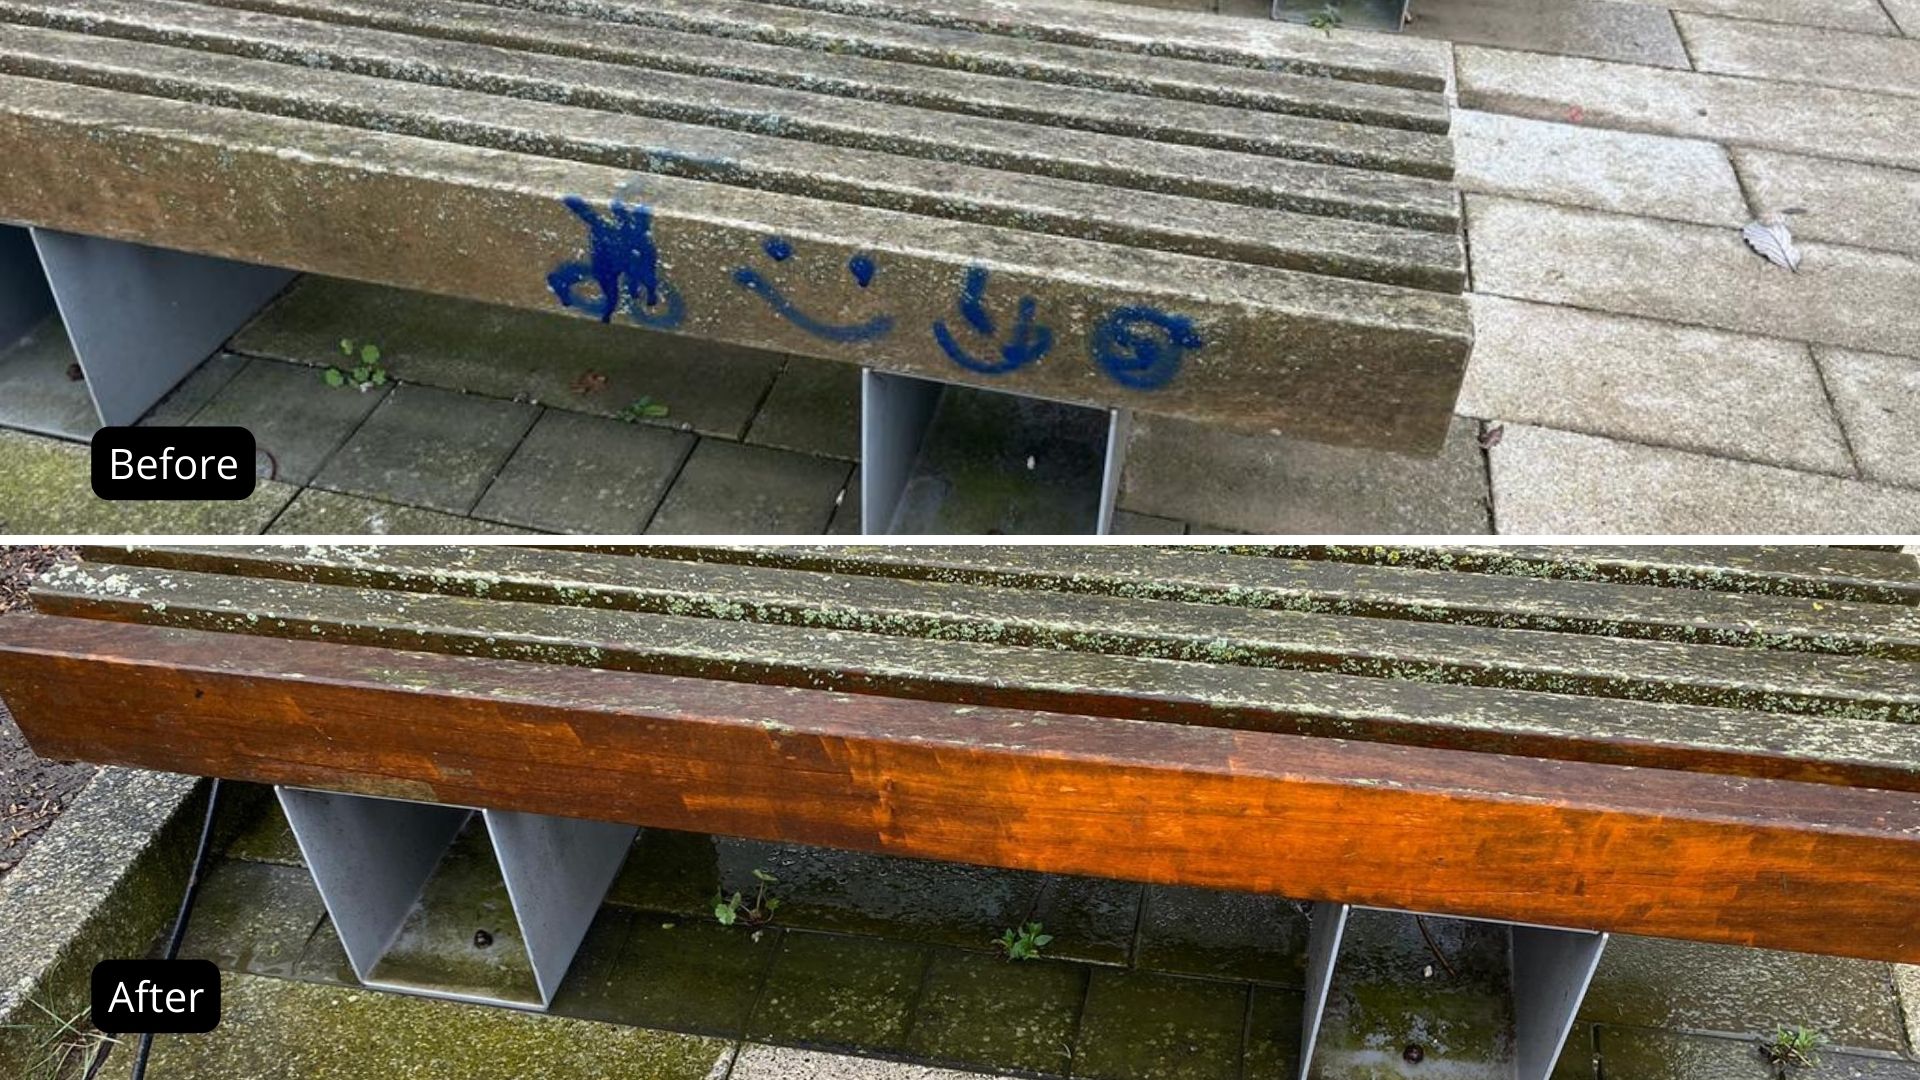 Before and after image of graffiti on a wooden bench